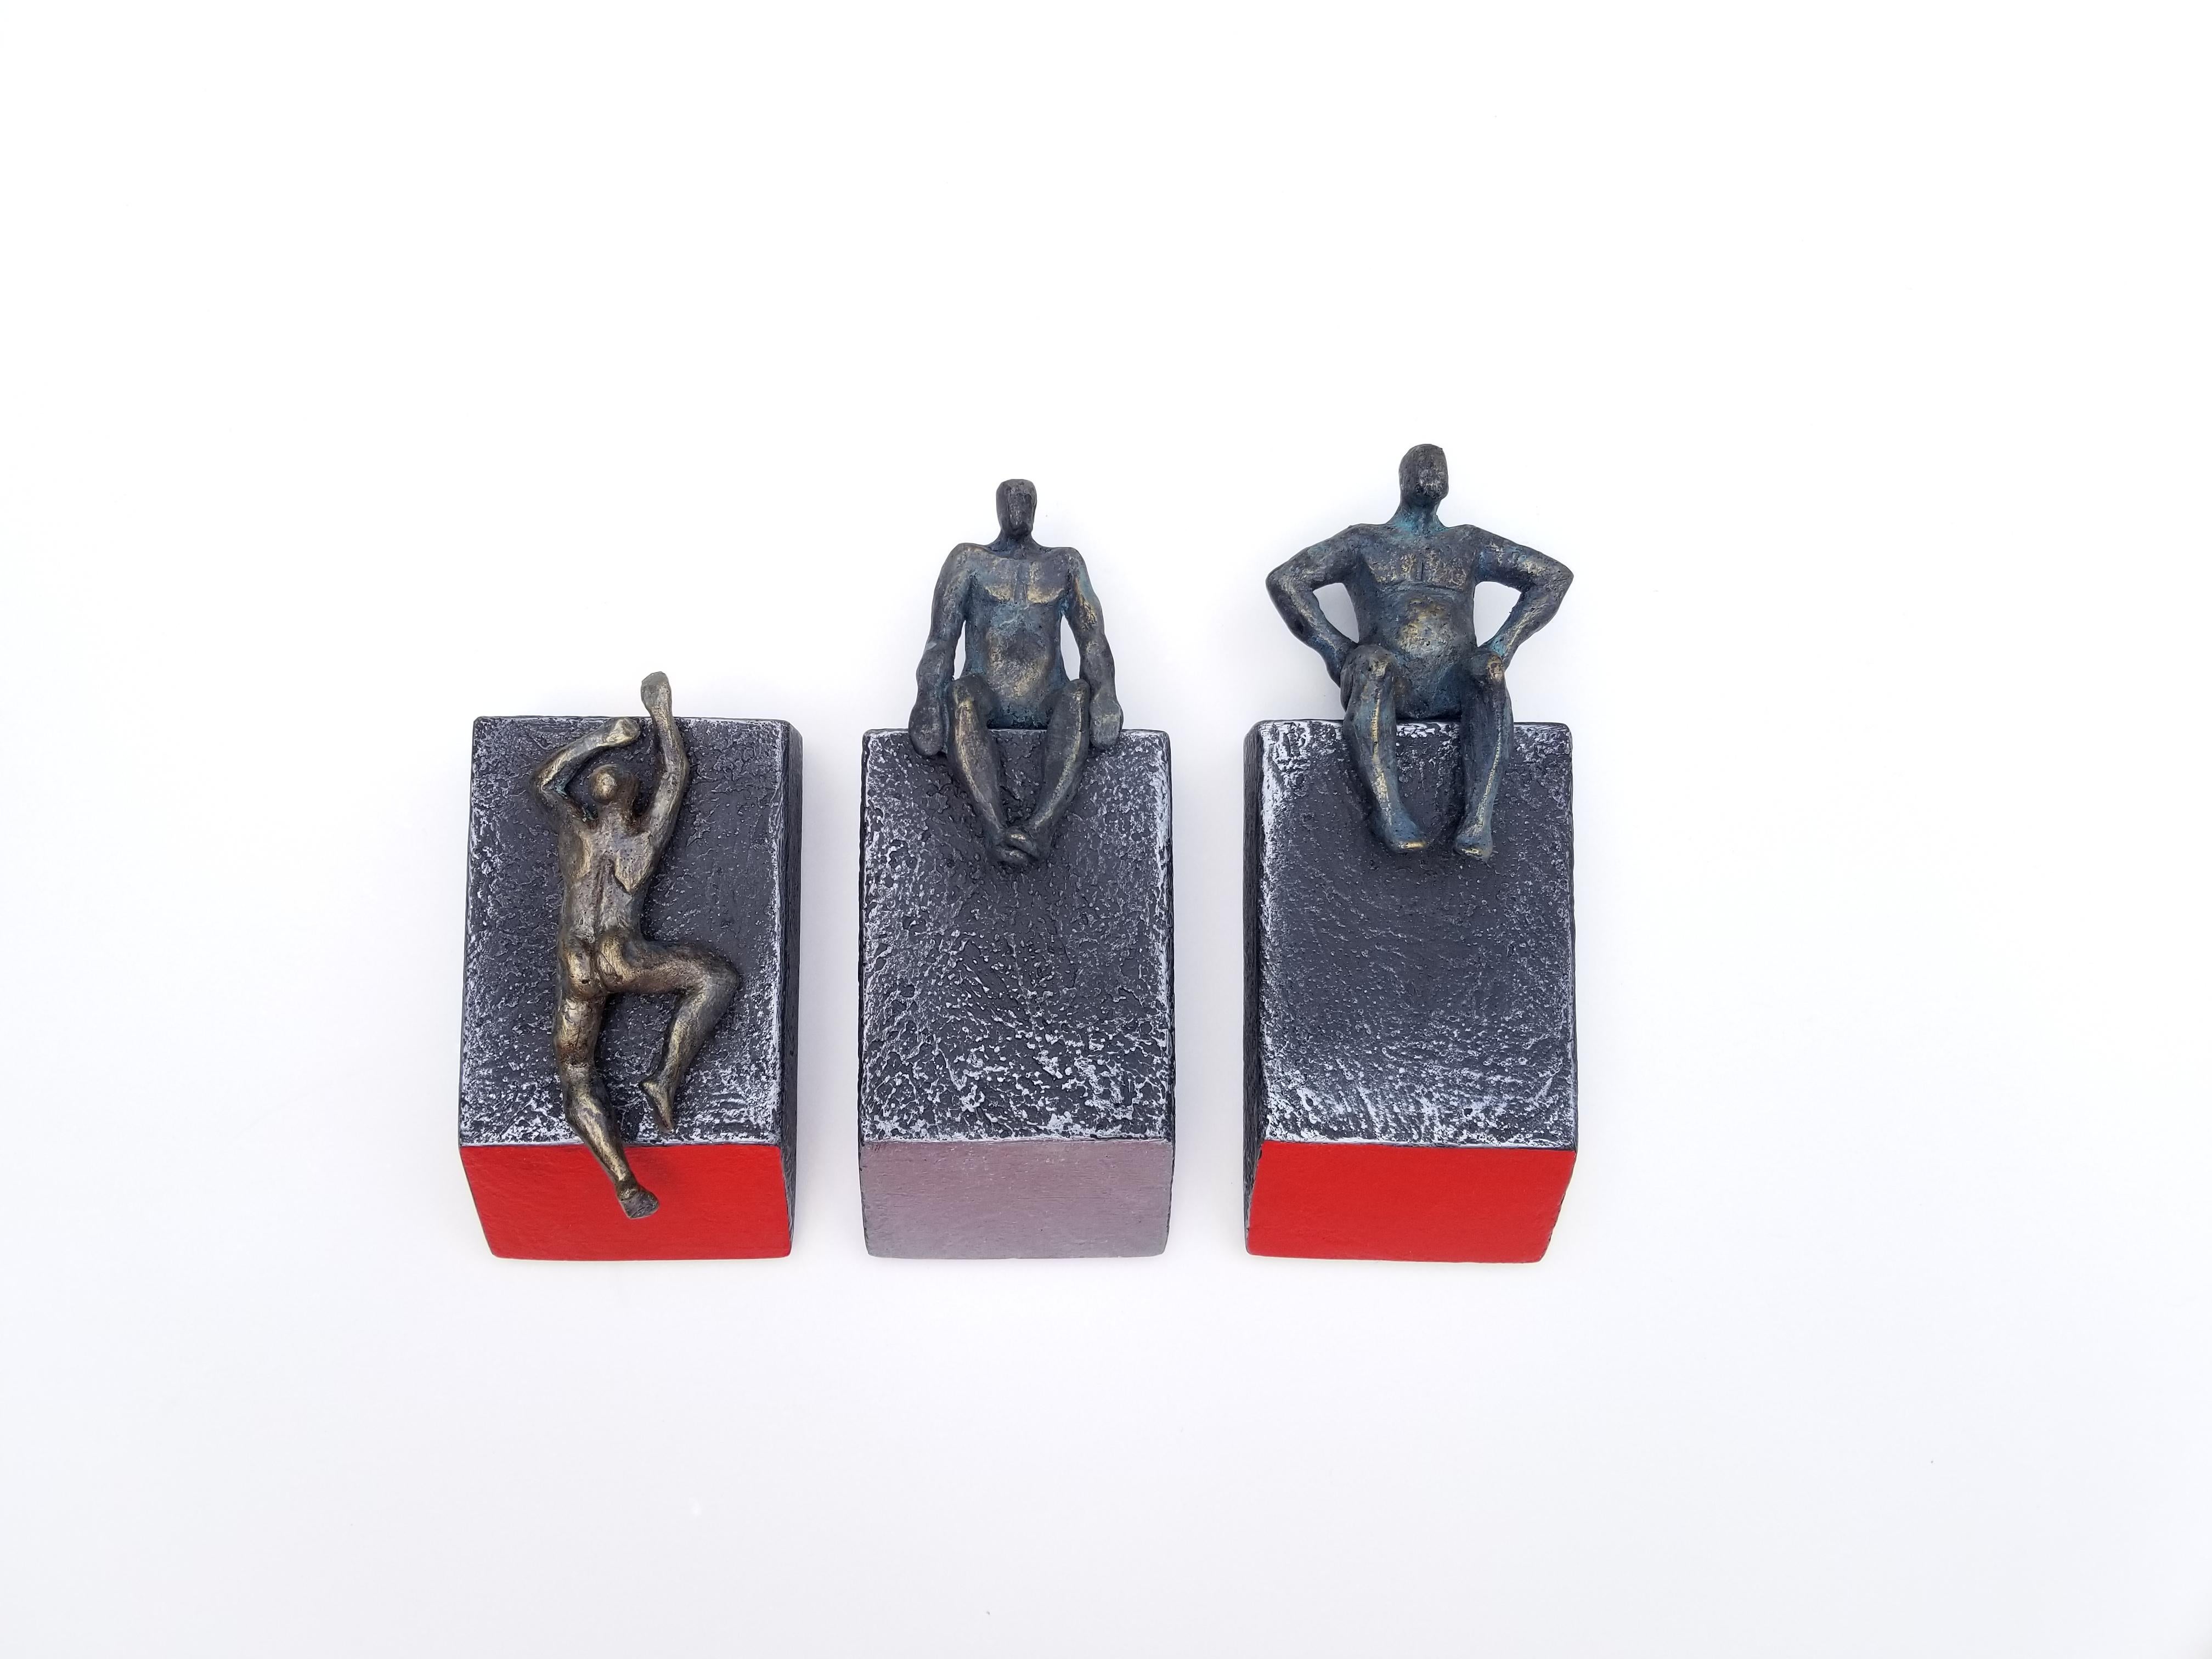 <p>Artist Comments<br>Unifying minimalist and modern styles, artist Yelitza Diaz builds a figurative sculpture of three figures settled on geometric pedestals. She manipulates the wooden elements to give it the roughness and apparent strength of